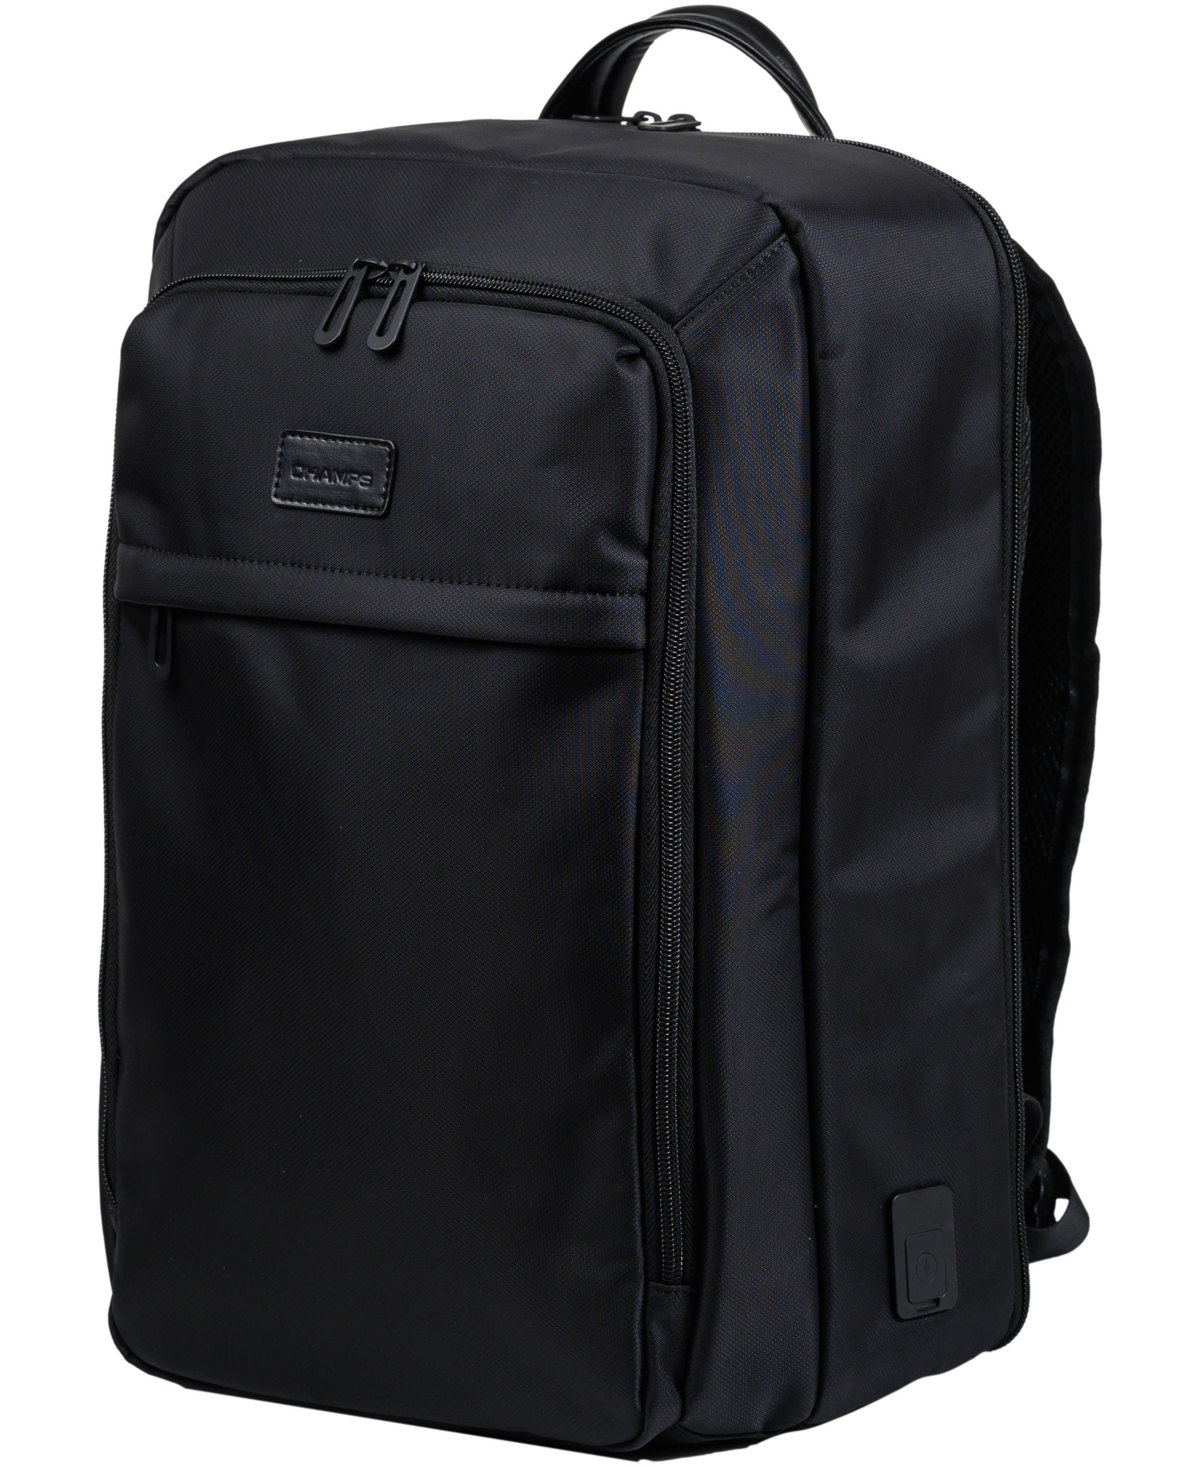 Onyx Collection - Everyday Backpack with Usb Port - Black